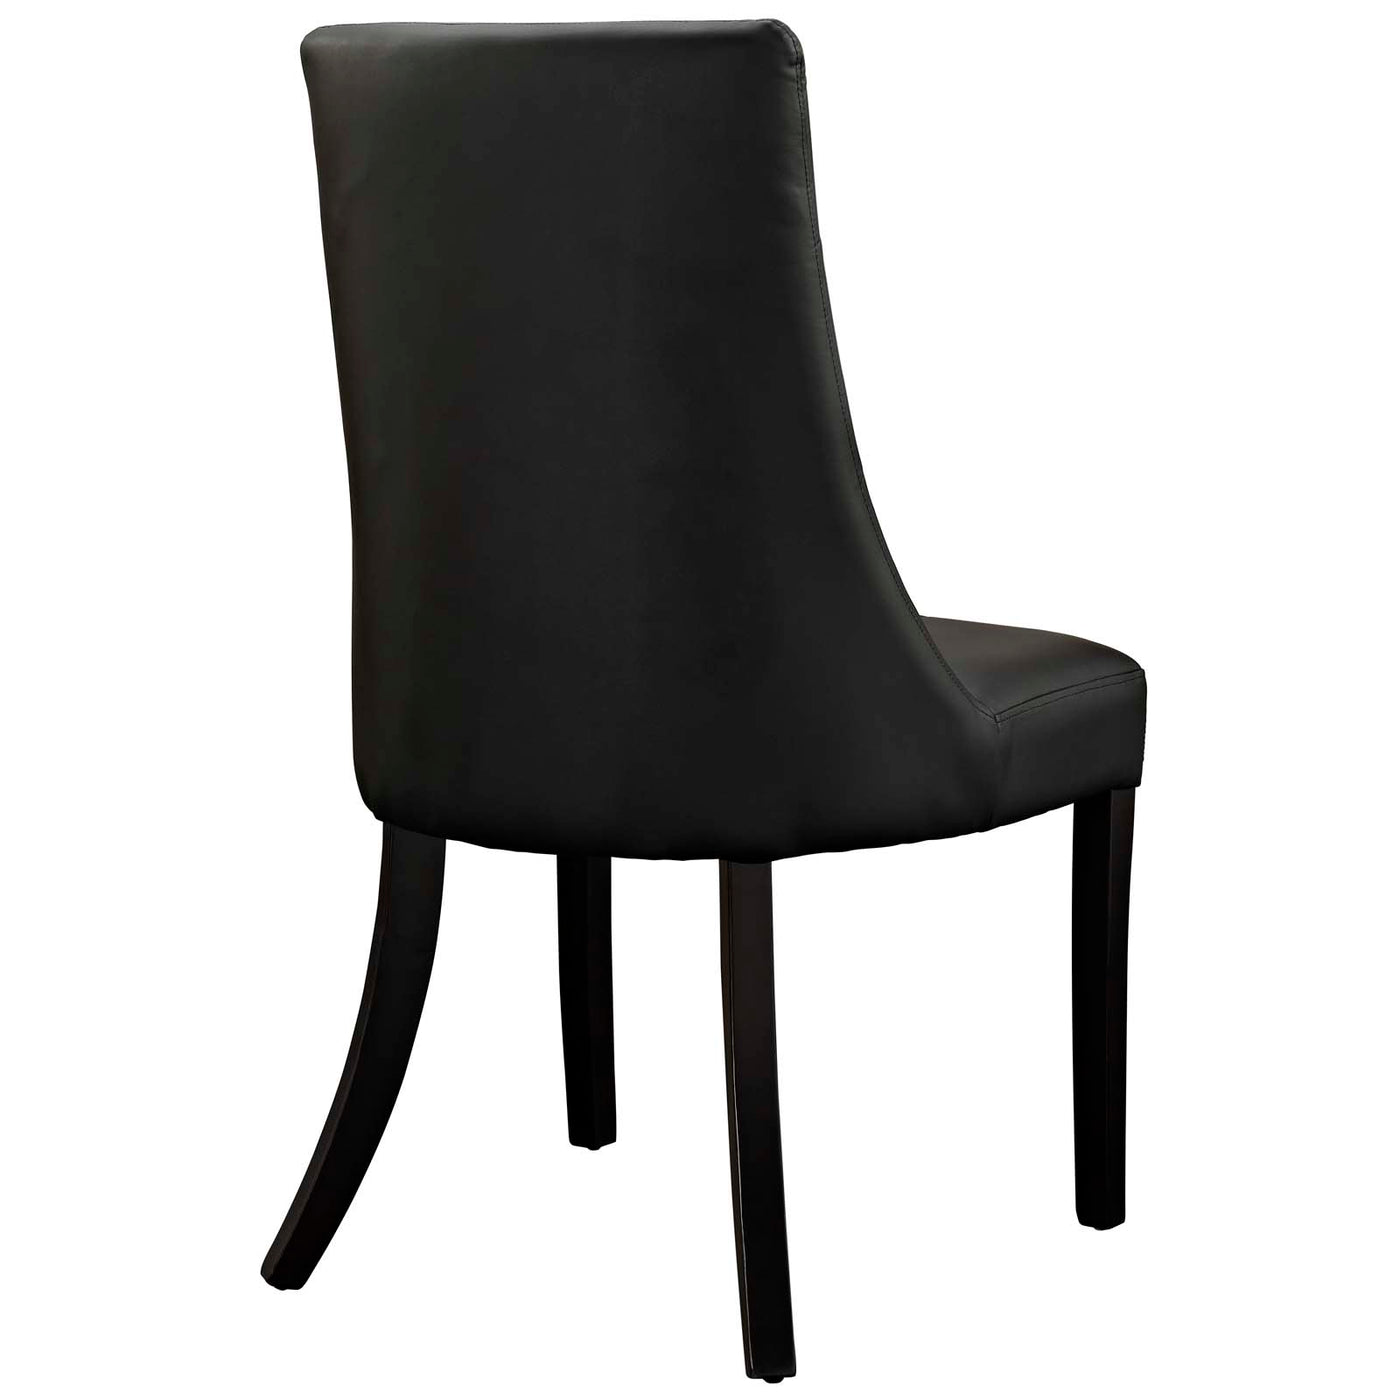 Noblesse Dining Chair Vinyl Set of 4